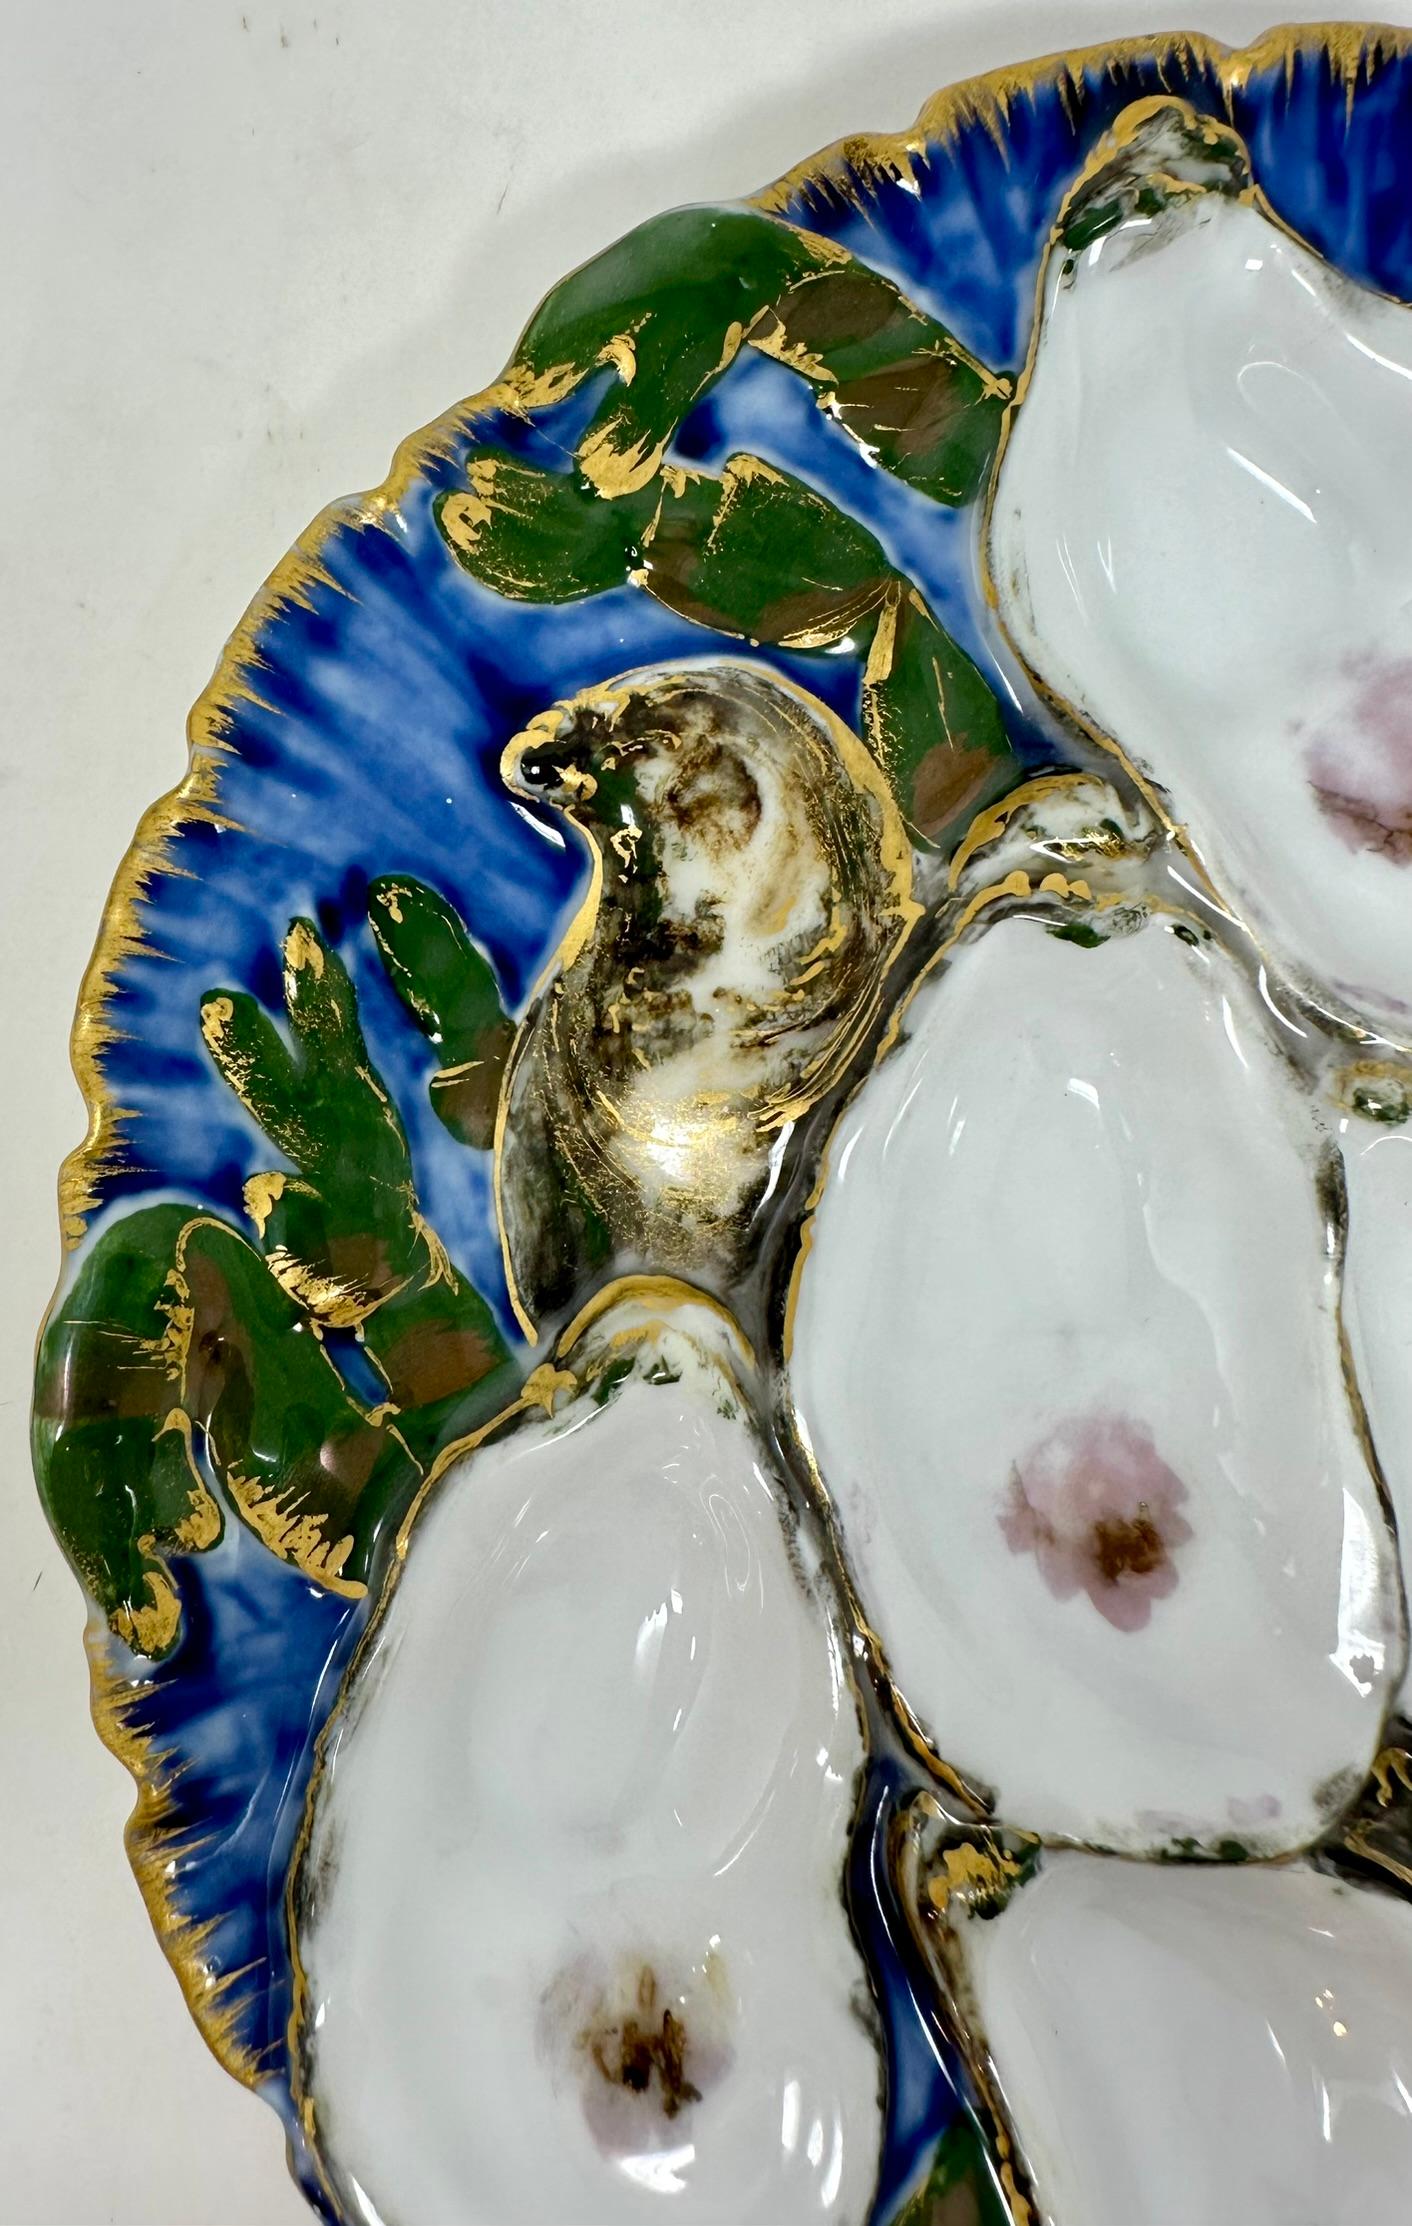 Antique French hand-painted Limoges porcelain Presidential oyster plate in the original Turkey pattern, Circa 1880's-1890's. Made by Haviland & Co.

Commissioned by the administration of American President Rutherford B. Hayes, this plate is the